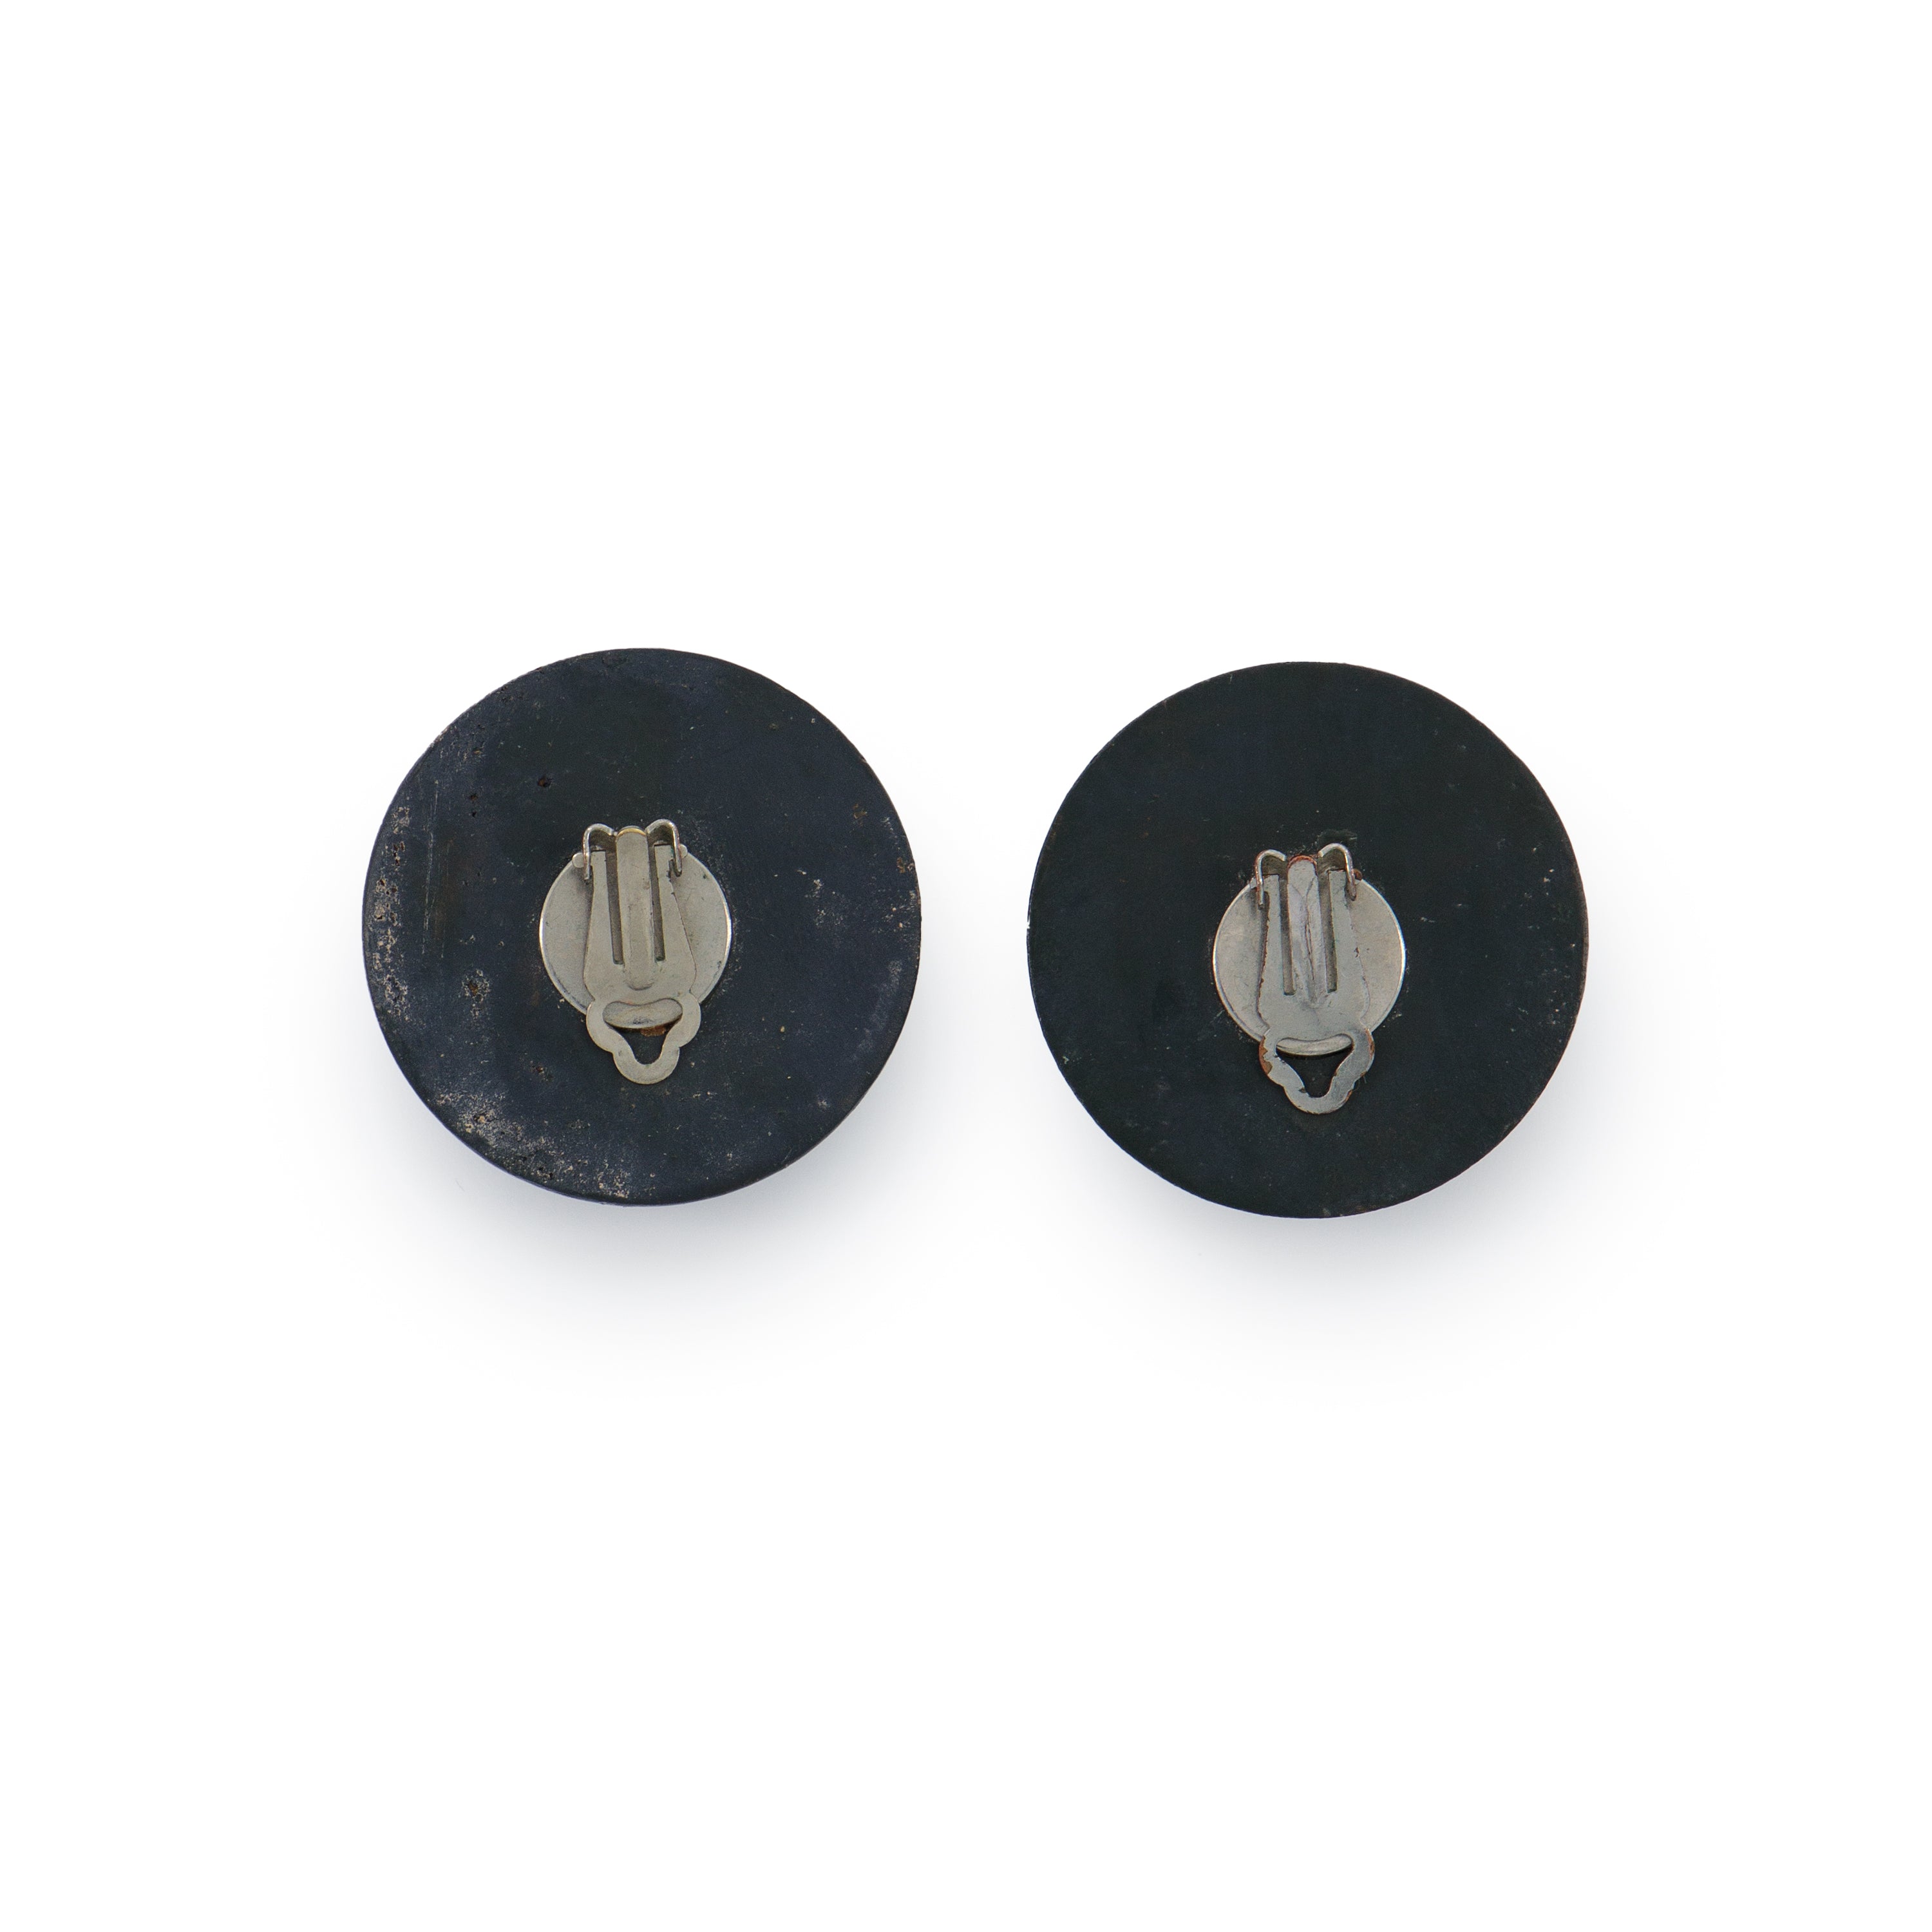 Clip-on closure side of vintage wood button ear clips